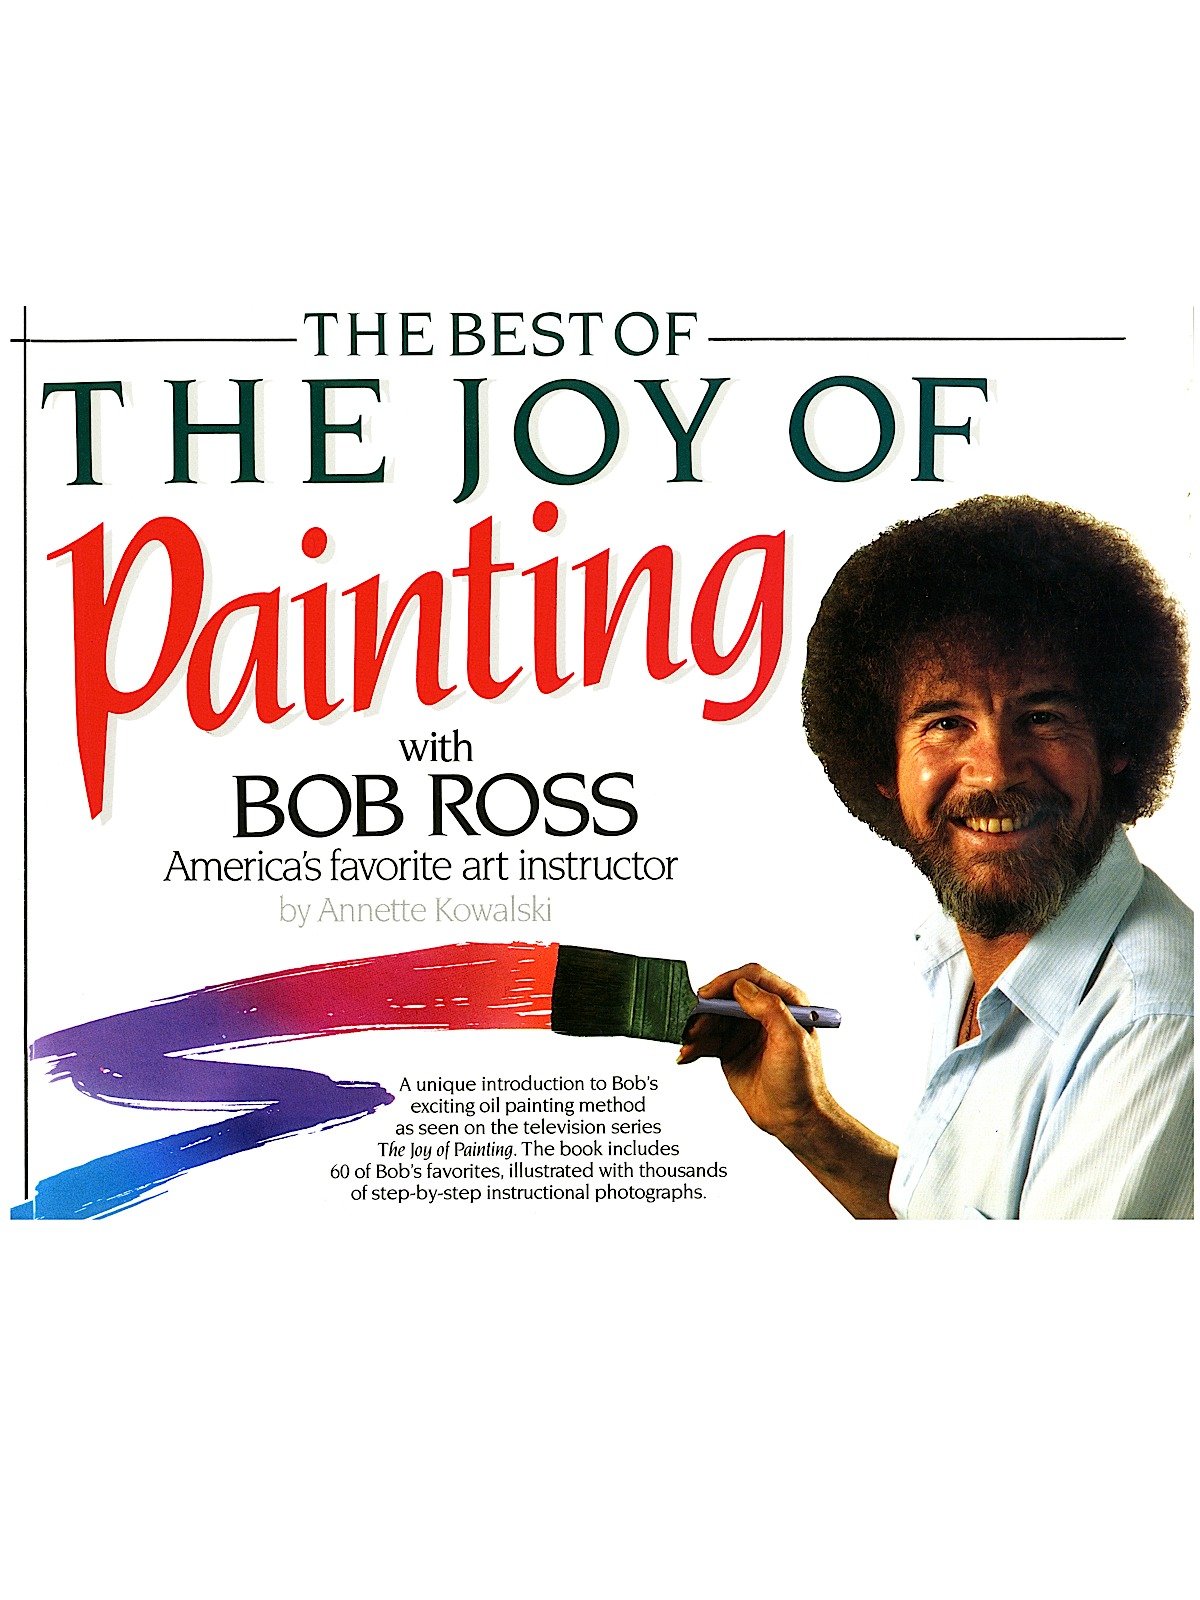 Bob Ross - Best of the Joy of Painting